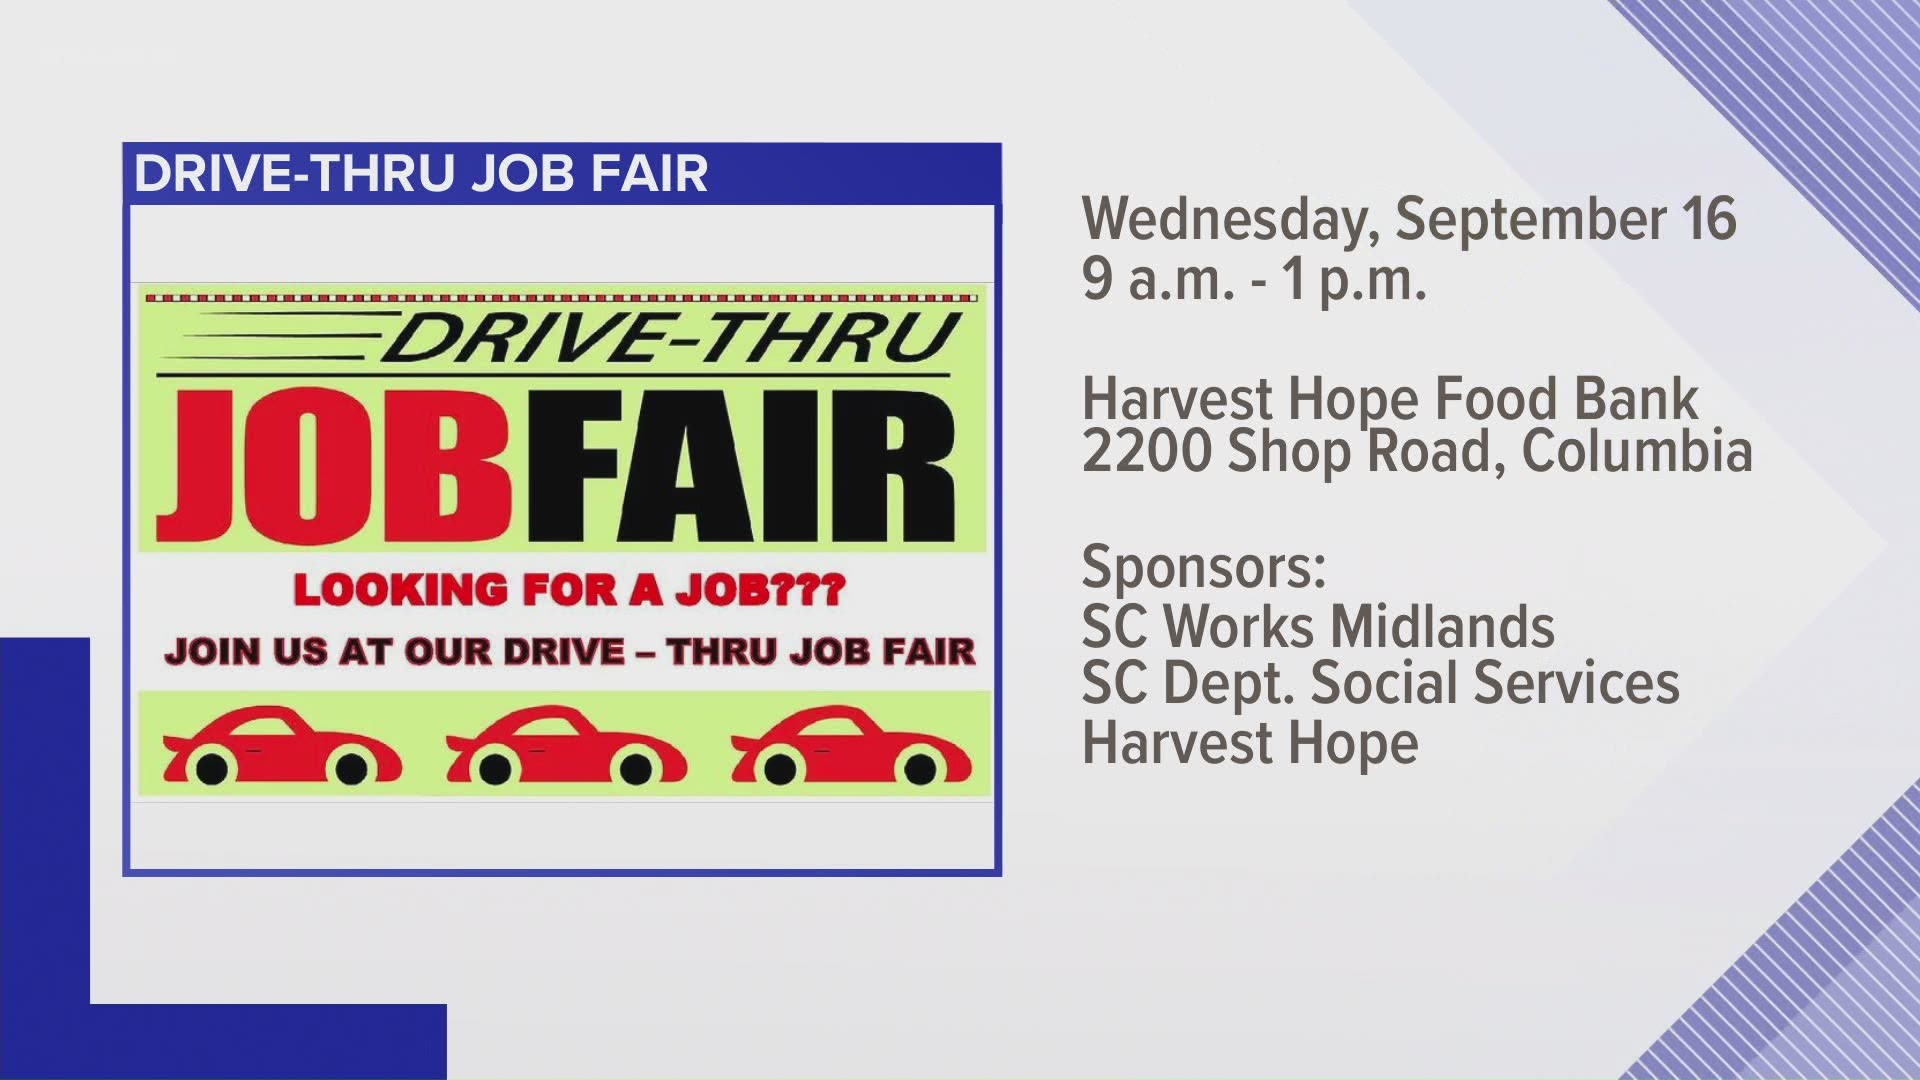 A drive-thru job fair will be held on Wednesday for Midlands job seekers to receive information about employment opportunities.